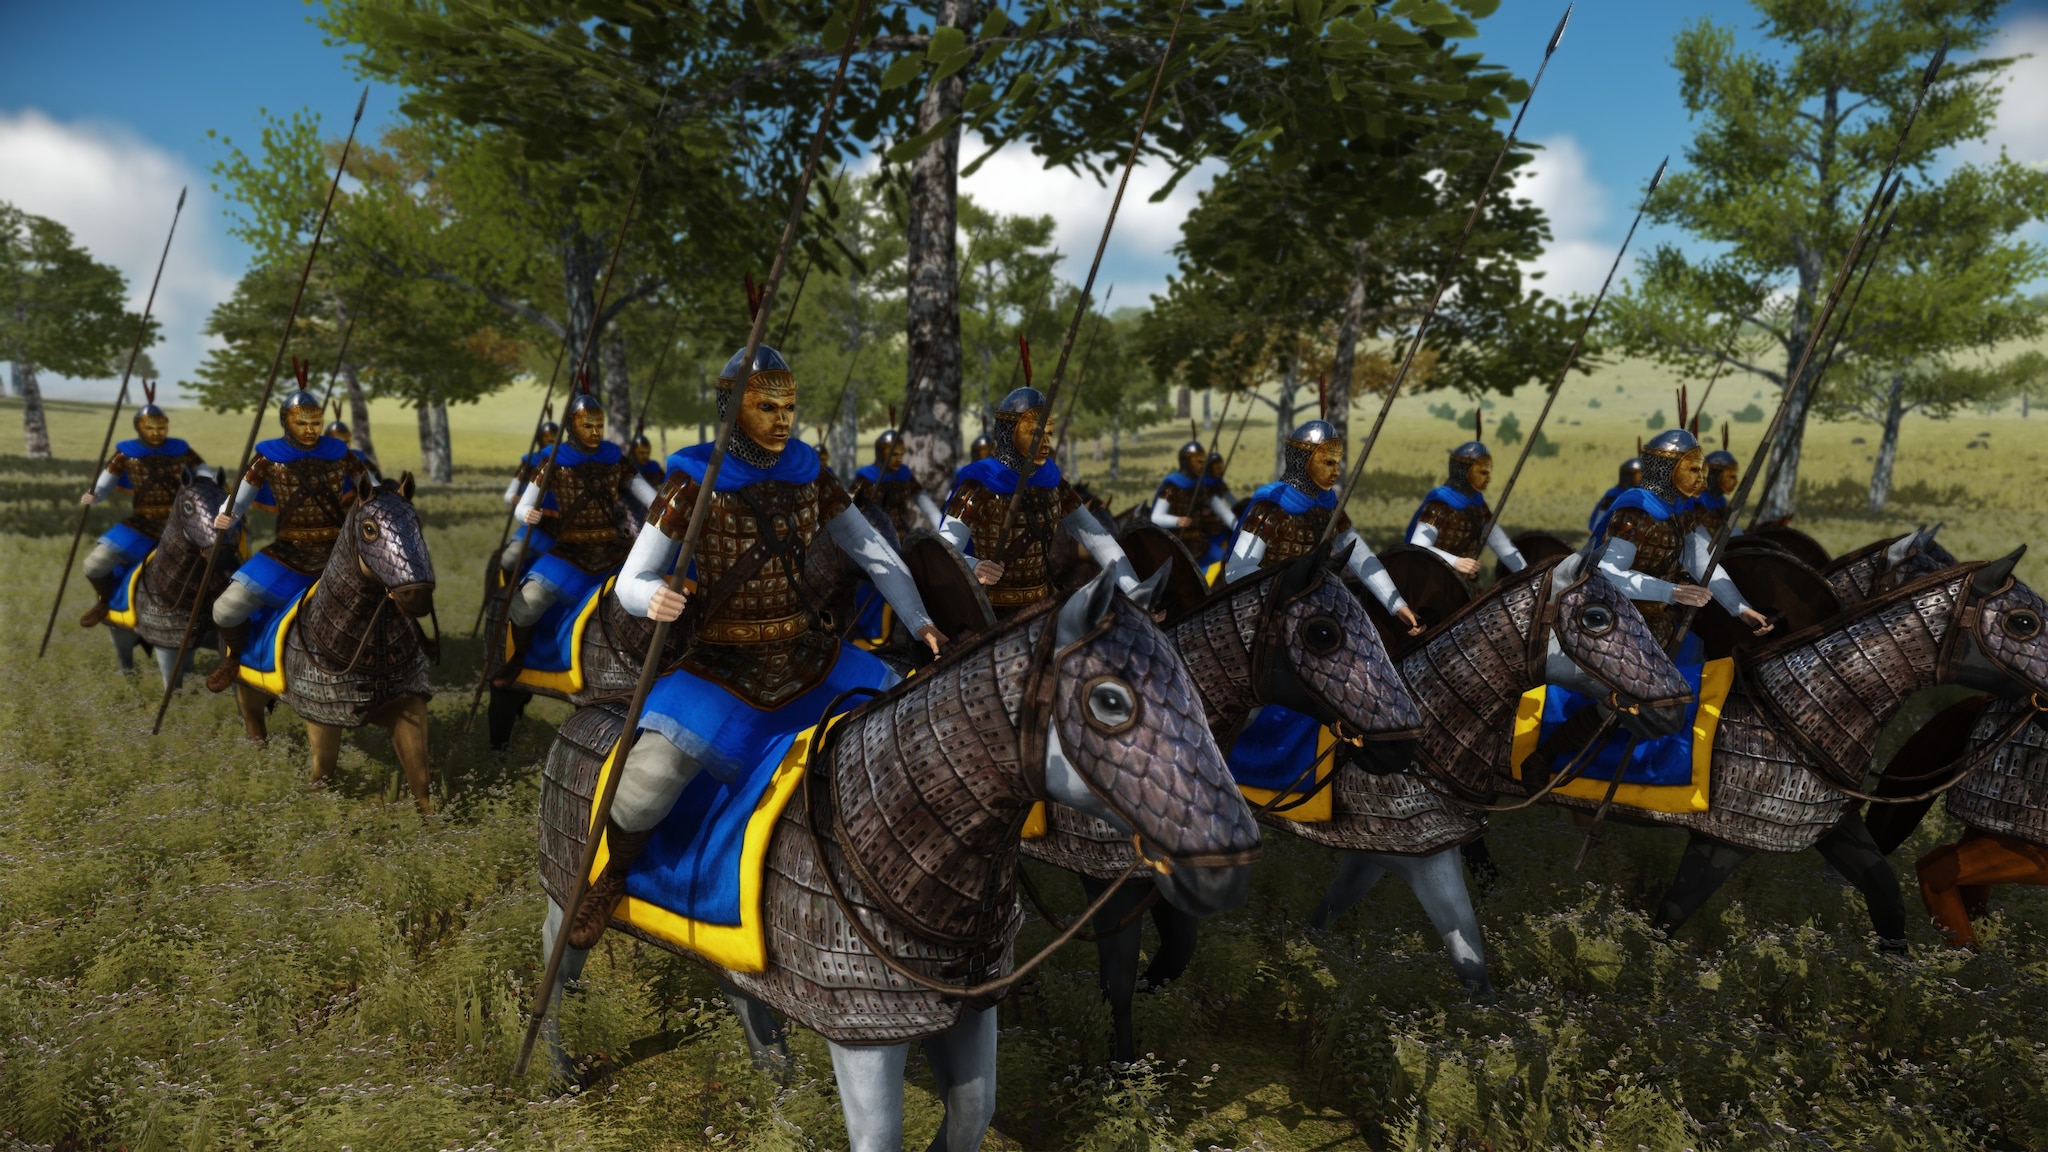 total war rome remastered